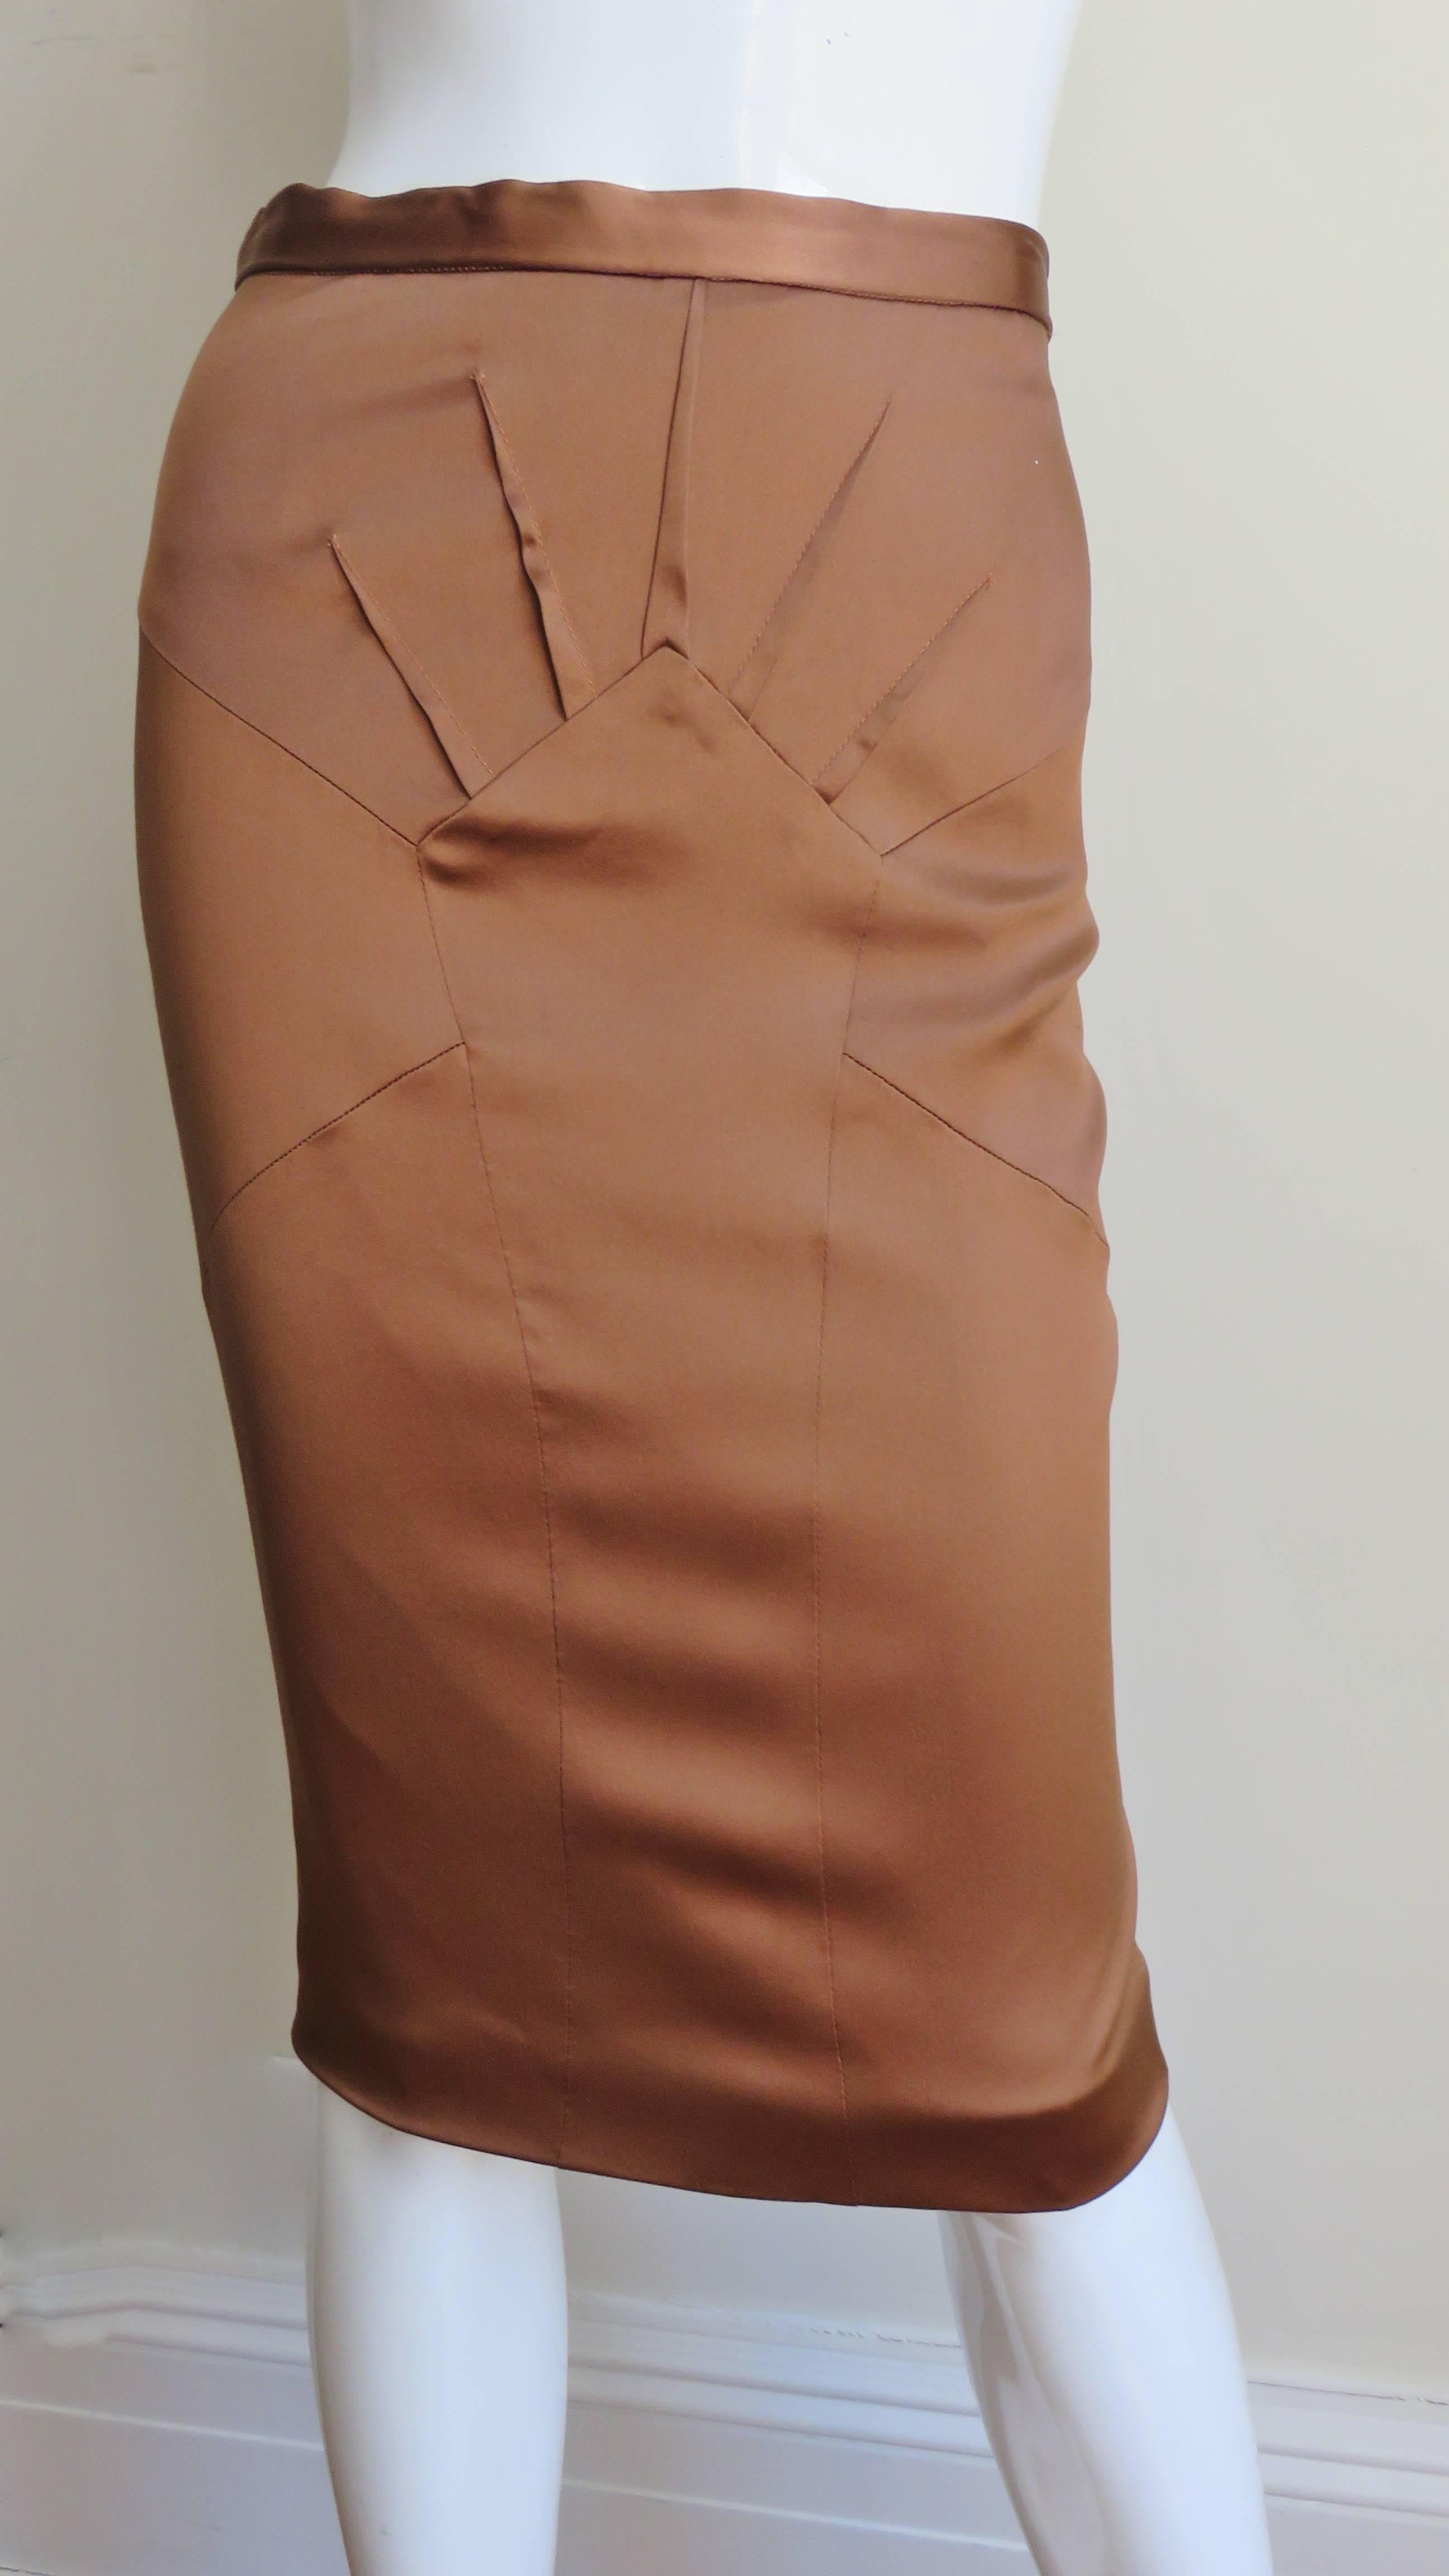 A beautiful copper brown stretch silk pencil skirt from Dolce & Gabbana. It has a waist band plus fabulous seaming and darts radiating from a center front panel.  It is lined in same fabric, has a back kick pleat at the hem and a center back